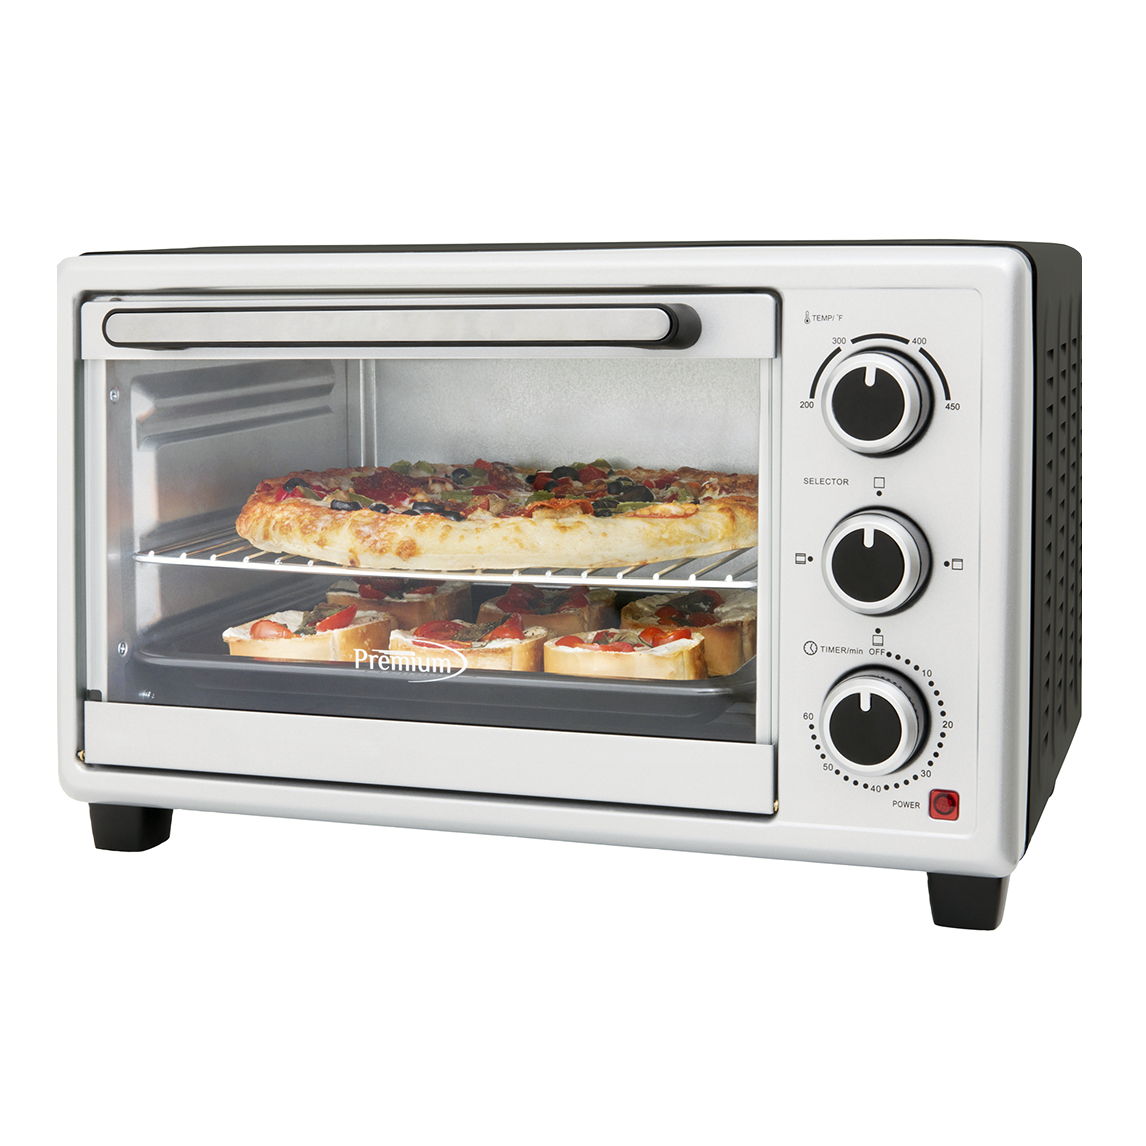 Premium  6-Slice Toaster Broil Oven 11" Pizza Bake. Stainless Steel Silver